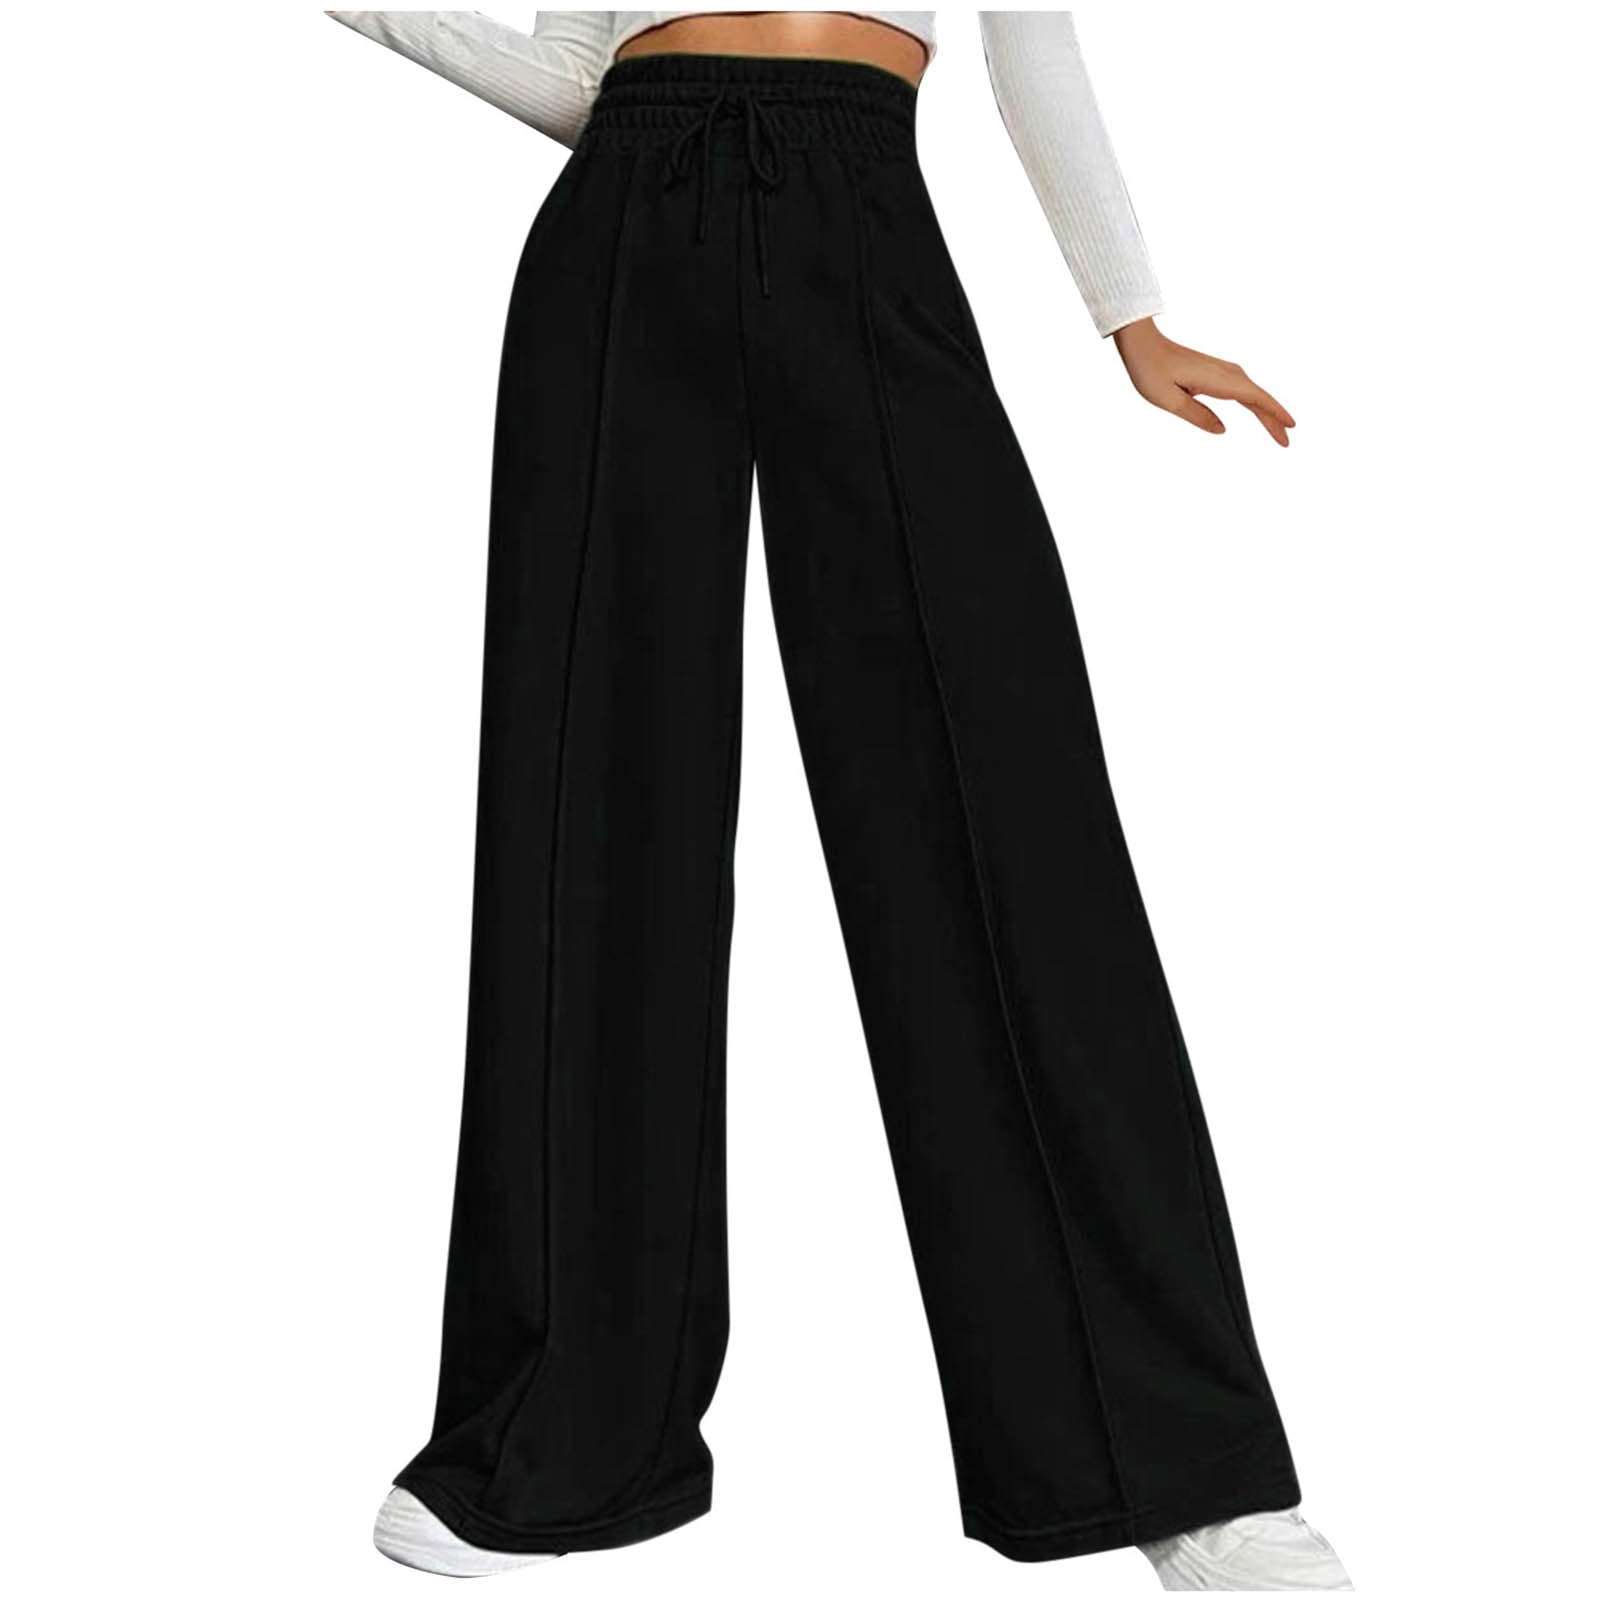 Fashion (Black Extended)Autumn Winter Women's Ankle-Length Pants Walf Check  Pants For Women High Waist Harem Pants Womens Loose Trousers Female 2021  New DOU @ Best Price Online